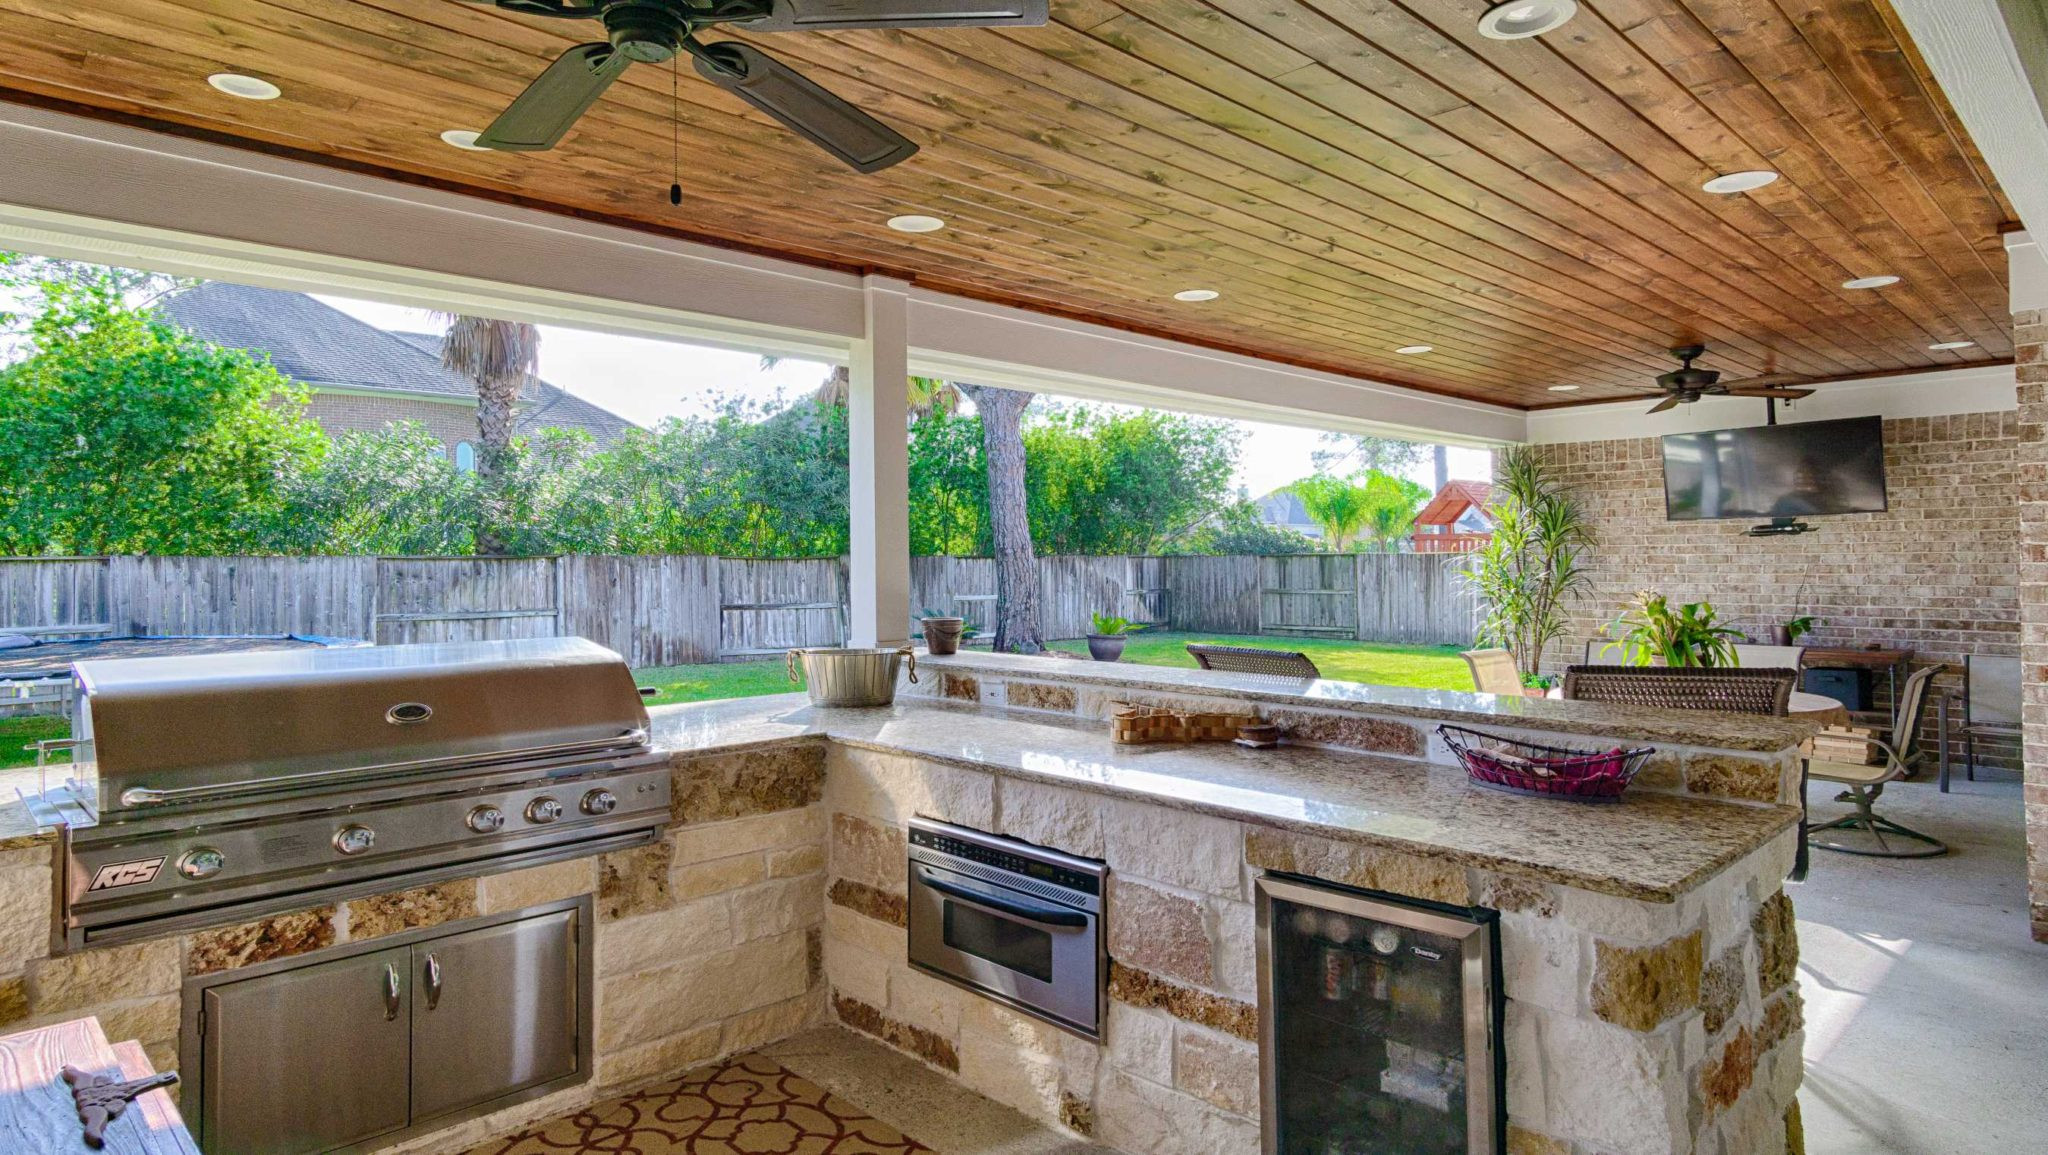 Outdoor Kitchen Images
 The Woodlands Outdoor Kitchen & Covered Patio Construction